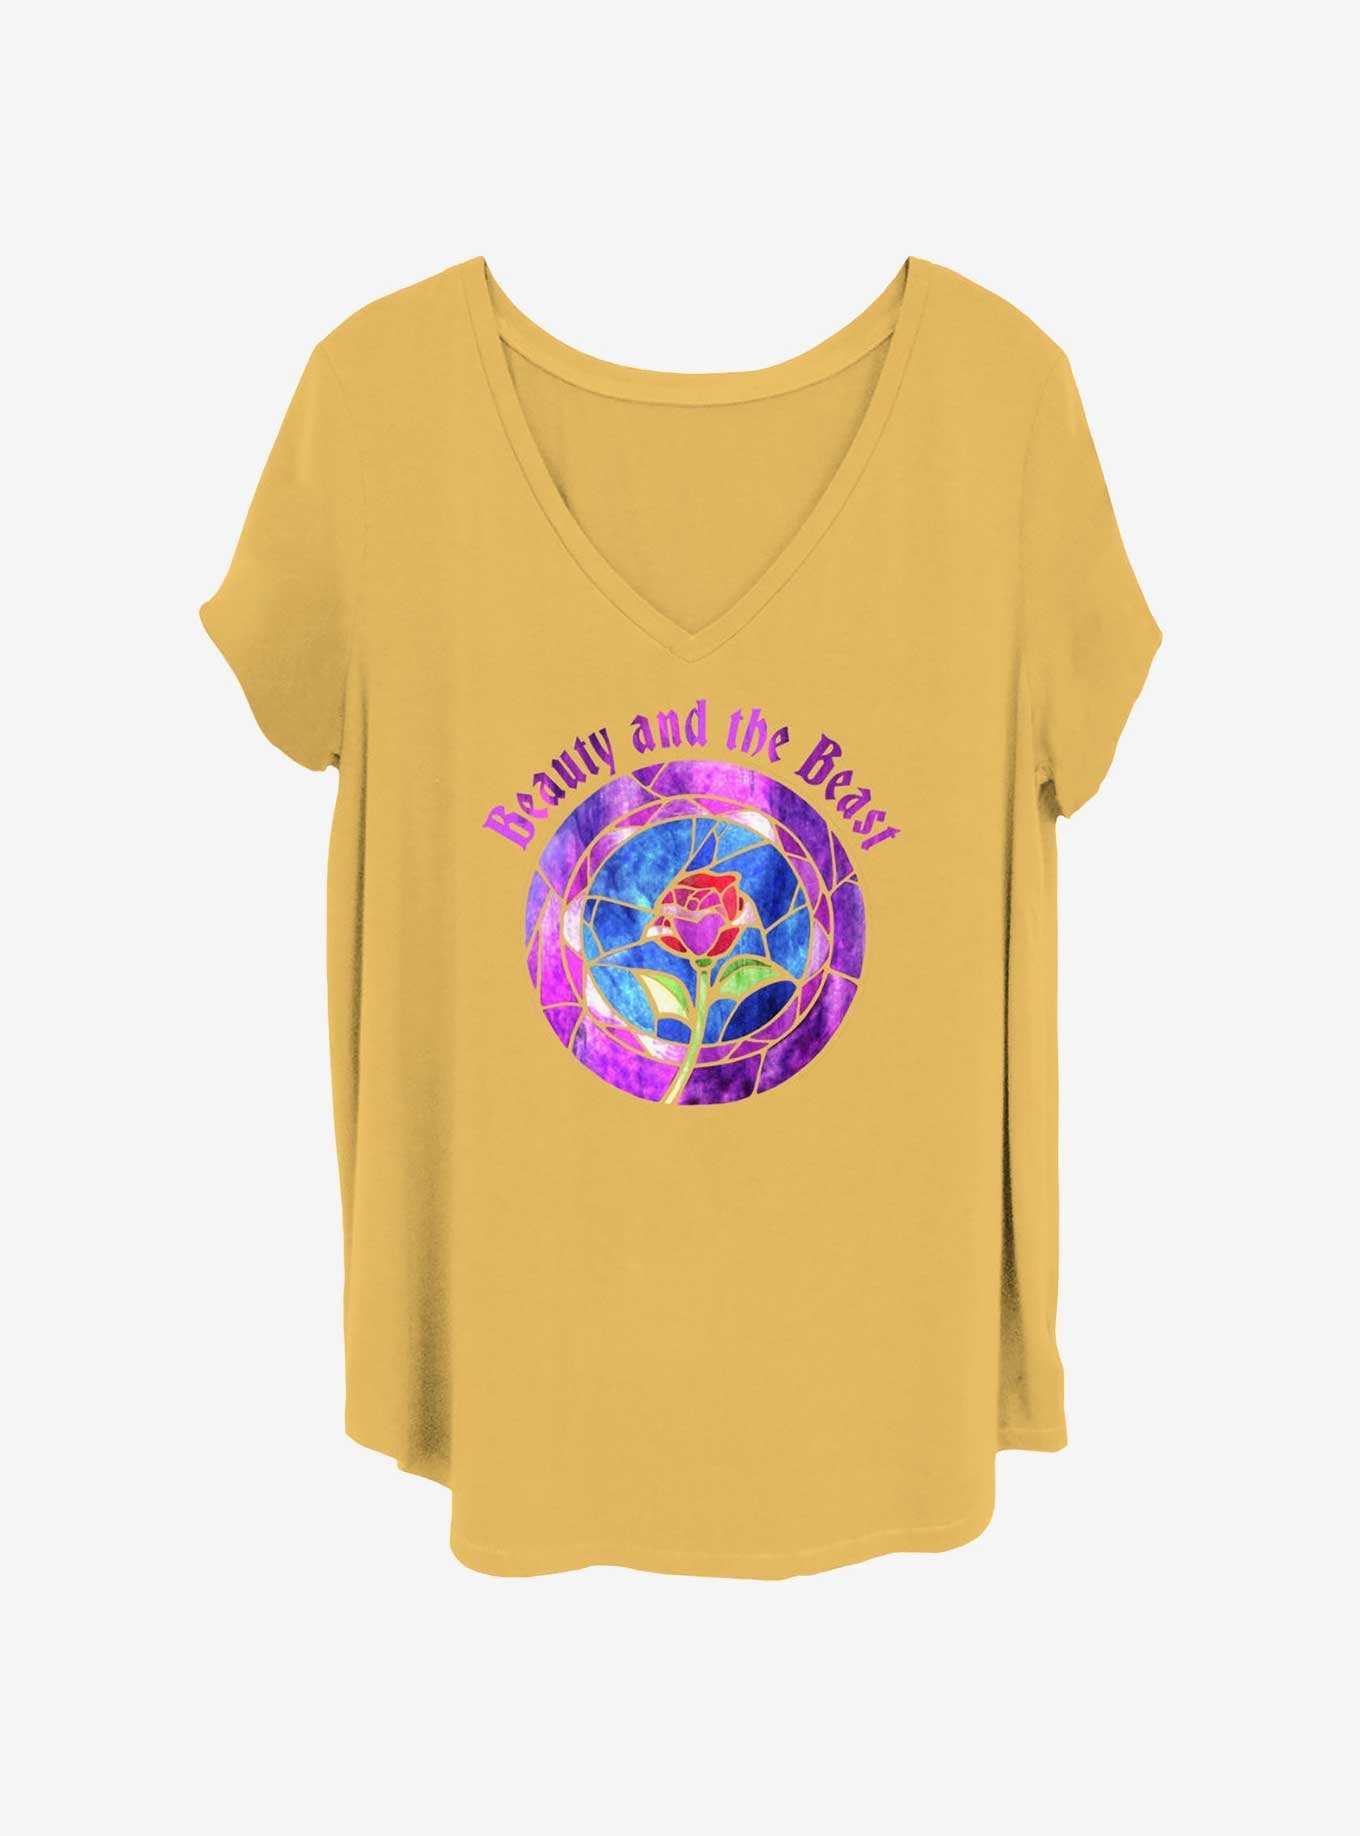 Disney Beauty and the Beast Stained Glass Rose Badge Girls T-Shirt Plus Size, , hi-res